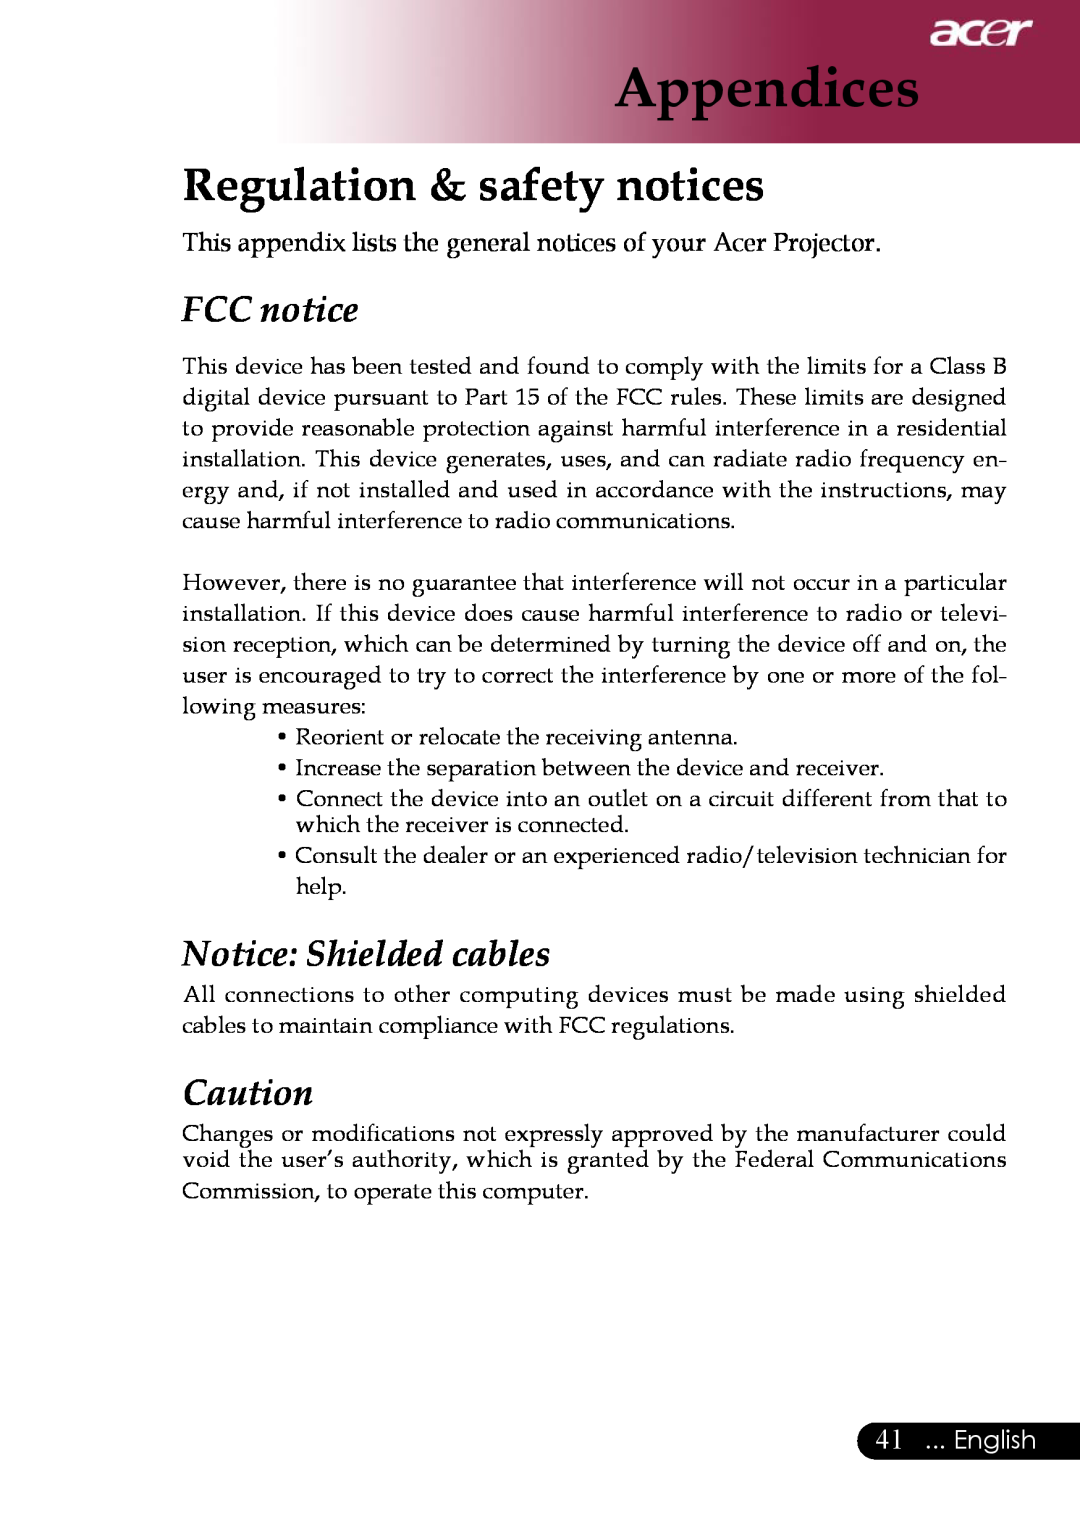 Acer PD311, PD323 manual Regulation & safety notices, FCC notice, Notice Shielded cables, English, Appendices 